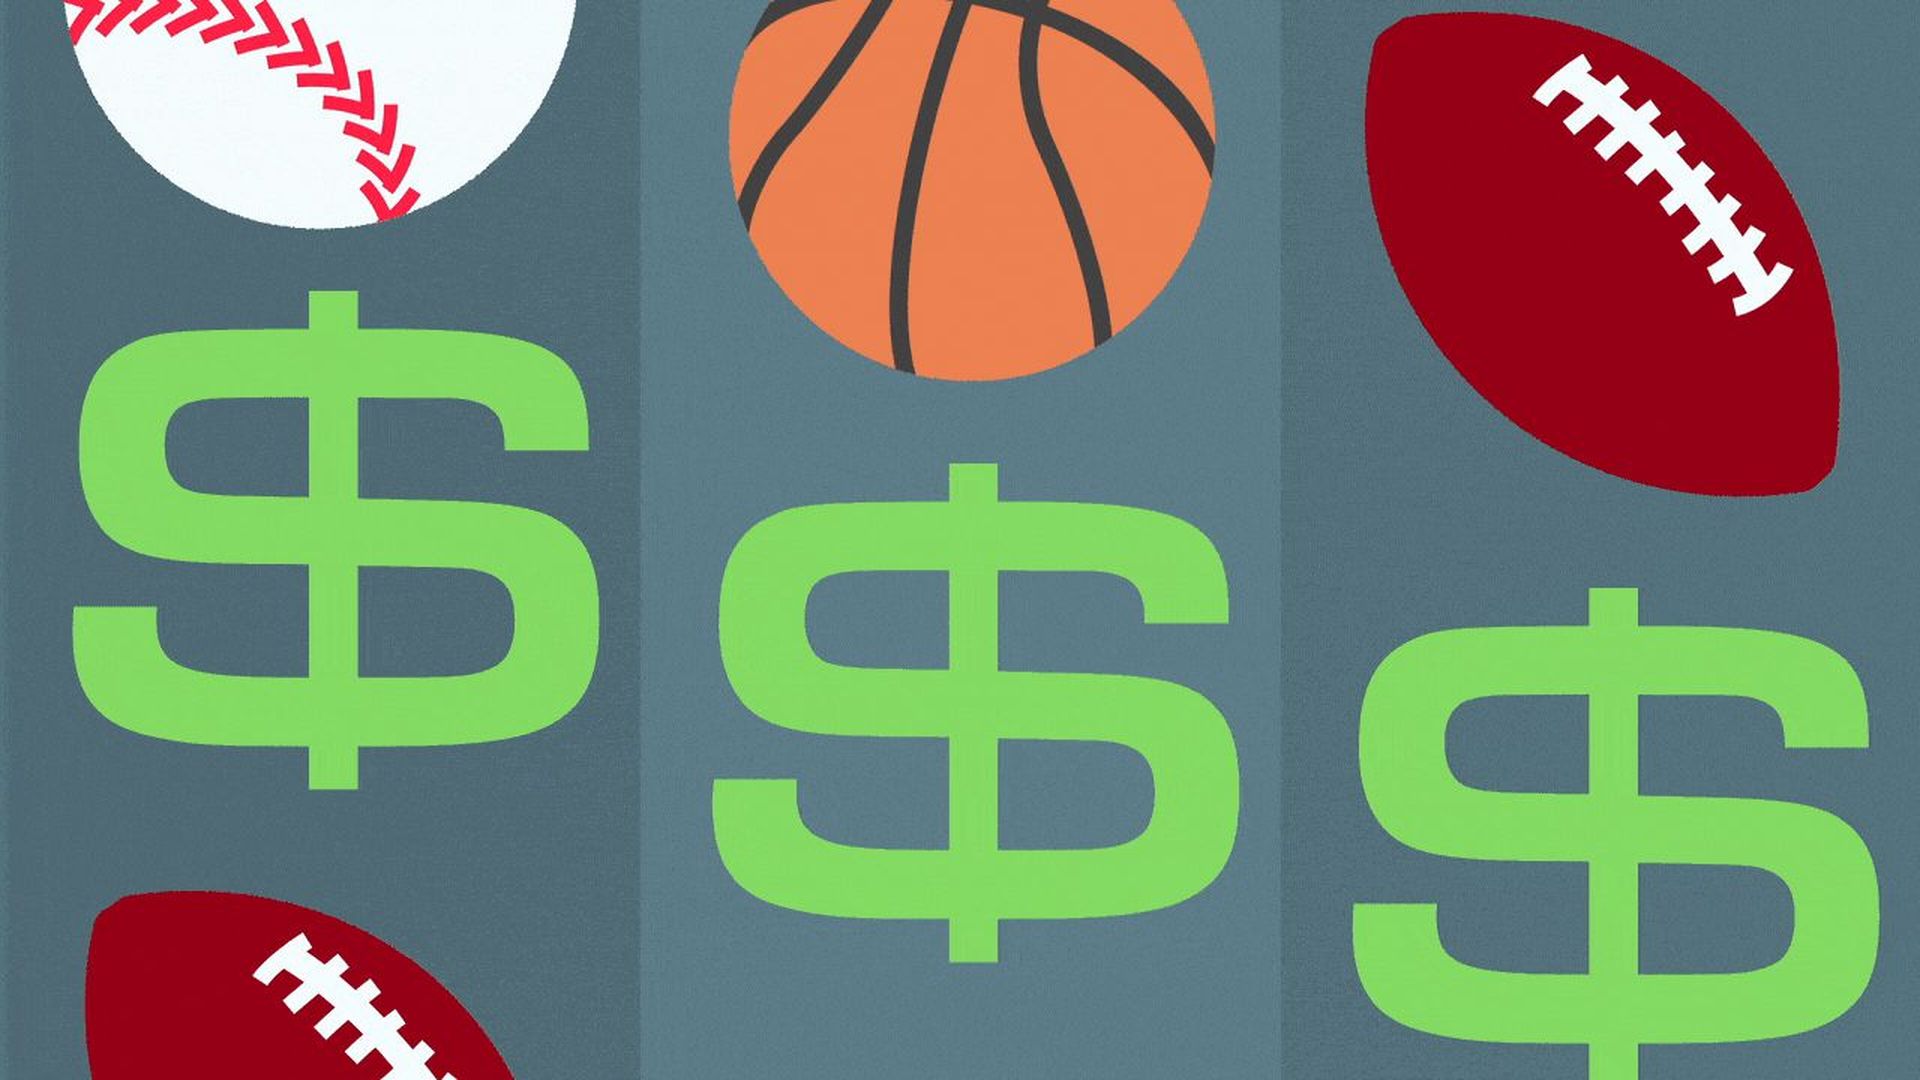 Illustration of a slot machine featuring a basketball, baseball, football, and dollar signs.